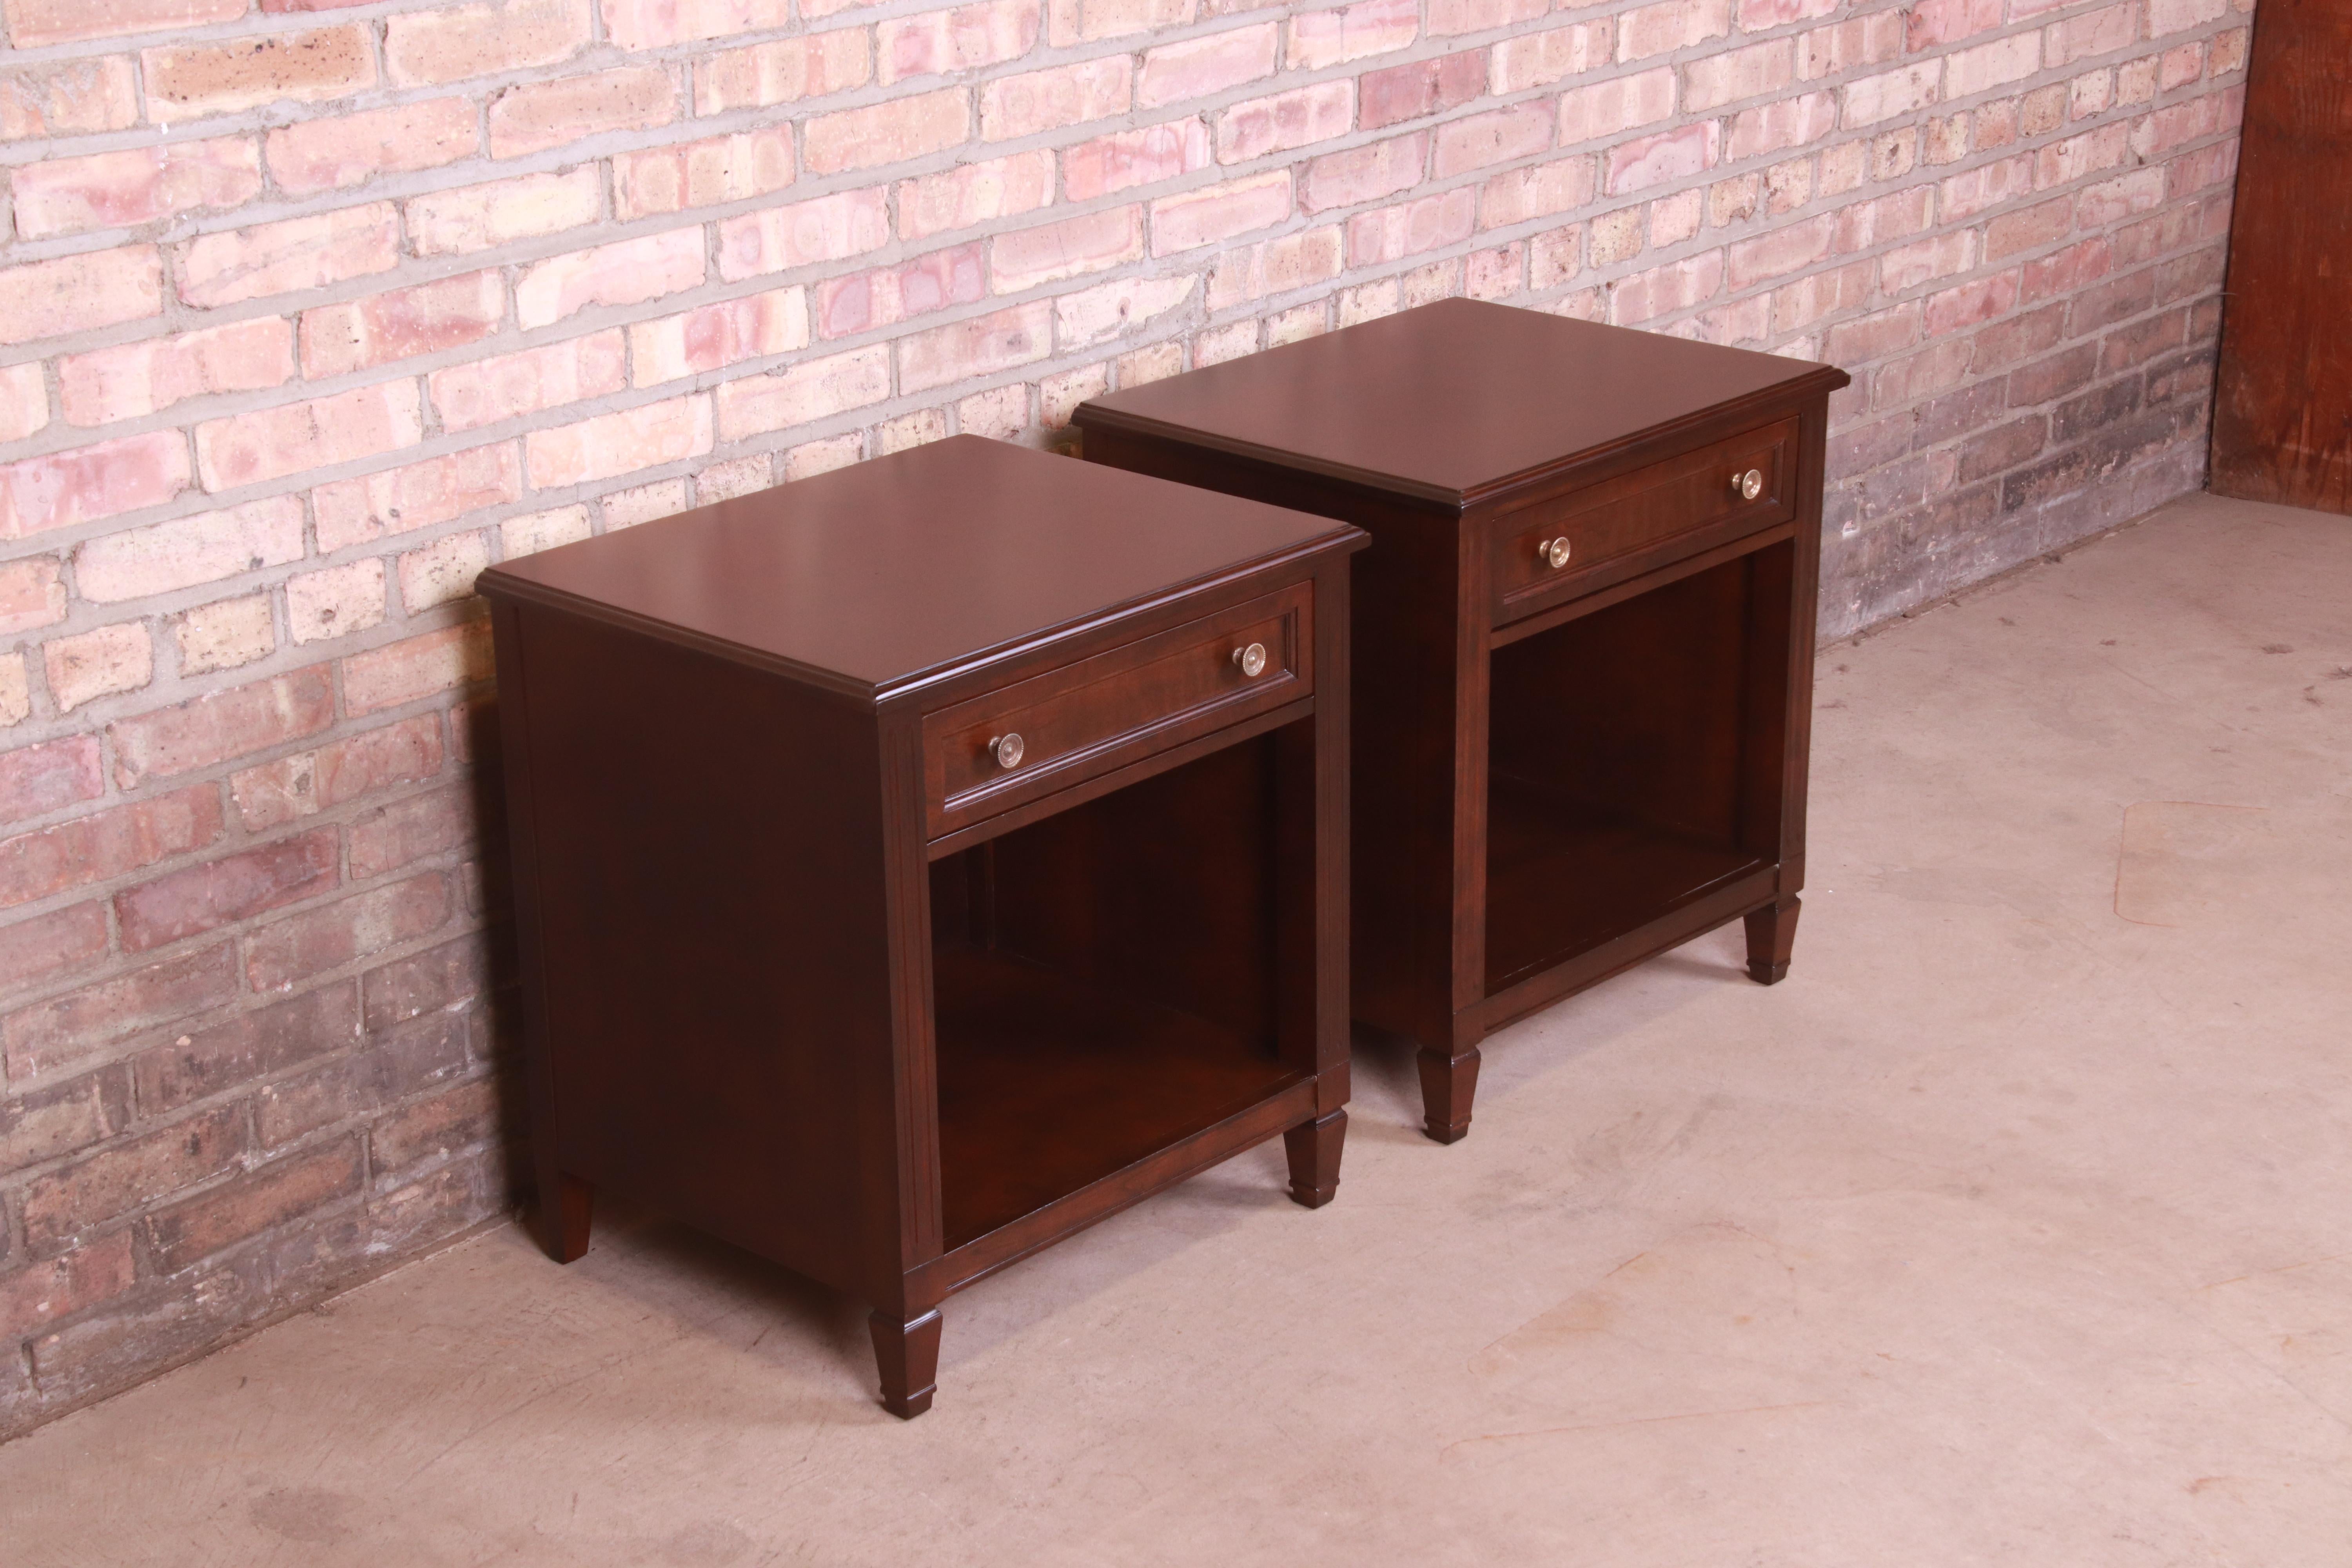 20th Century Kindel Furniture French Regency Louis XVI Cherry Wood Nightstands, Refinished